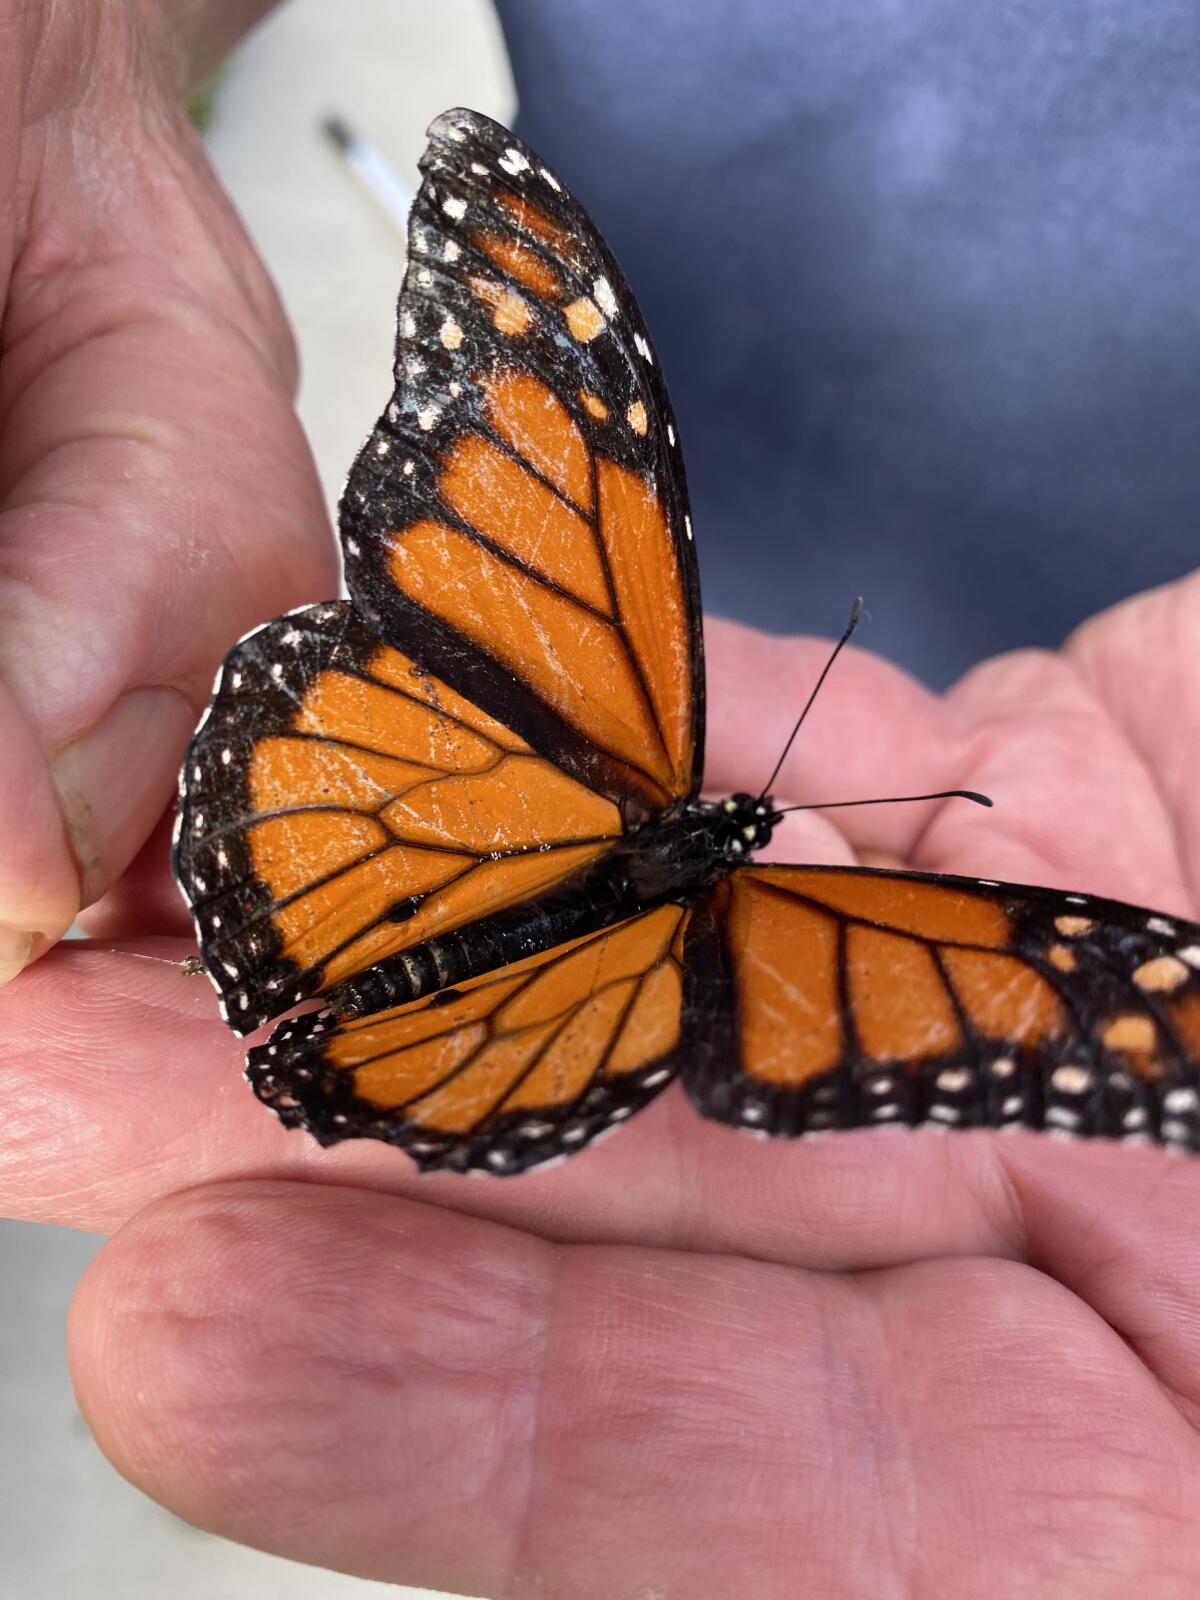 A monarch butterfly rescued from a spider web.